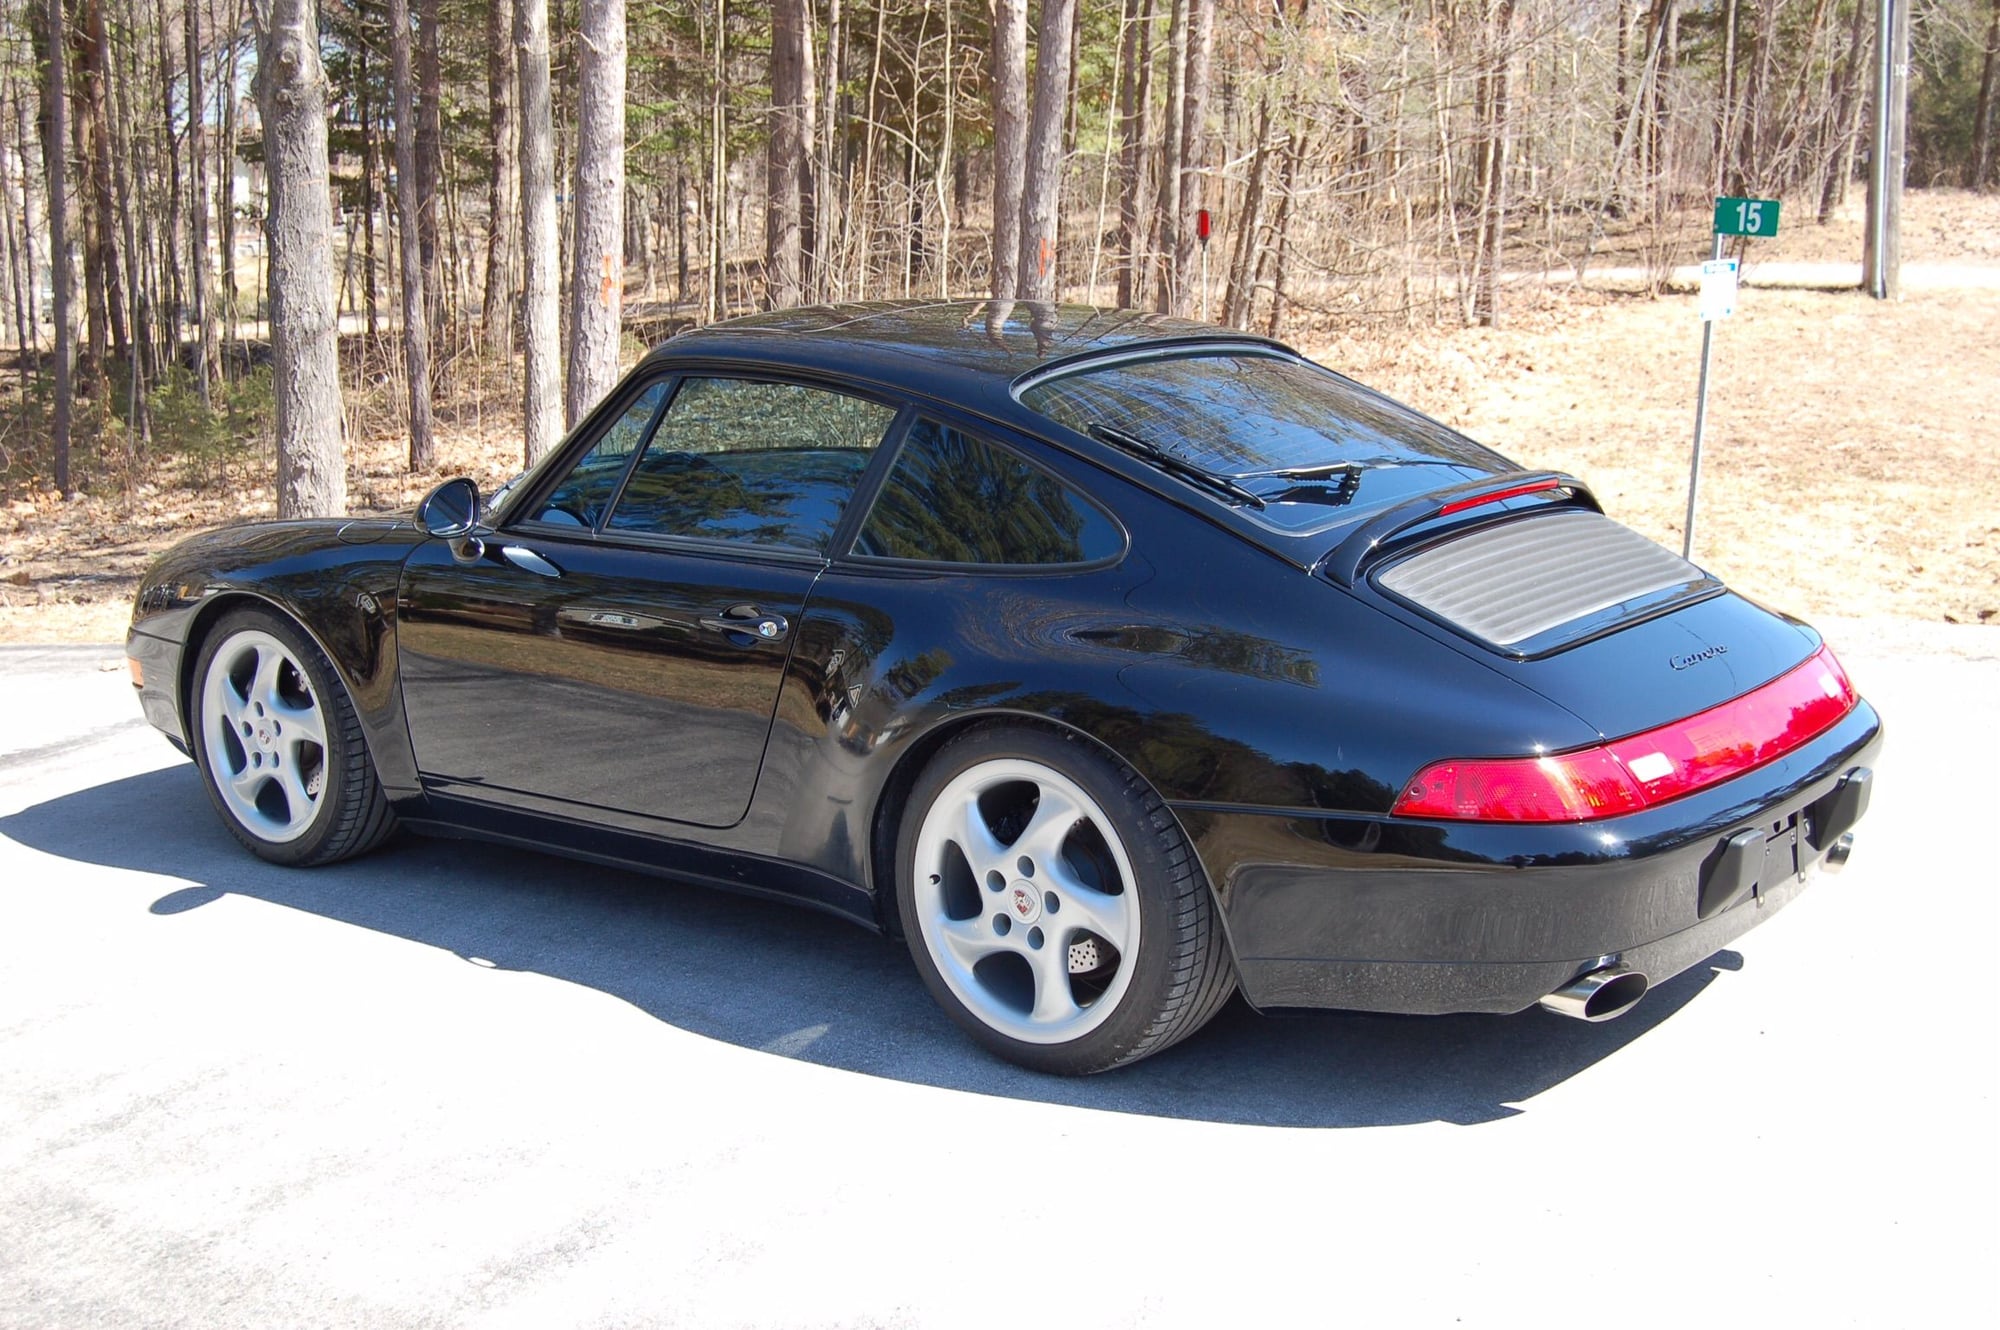 1995 Porsche 911 - 1995 Porsche Carrera 911 ( 993 C2 ) - Used - VIN WP00AA2997SS32063 - 2WD - Manual - Coupe - Black - Bethany, ON L0A1A0, Canada